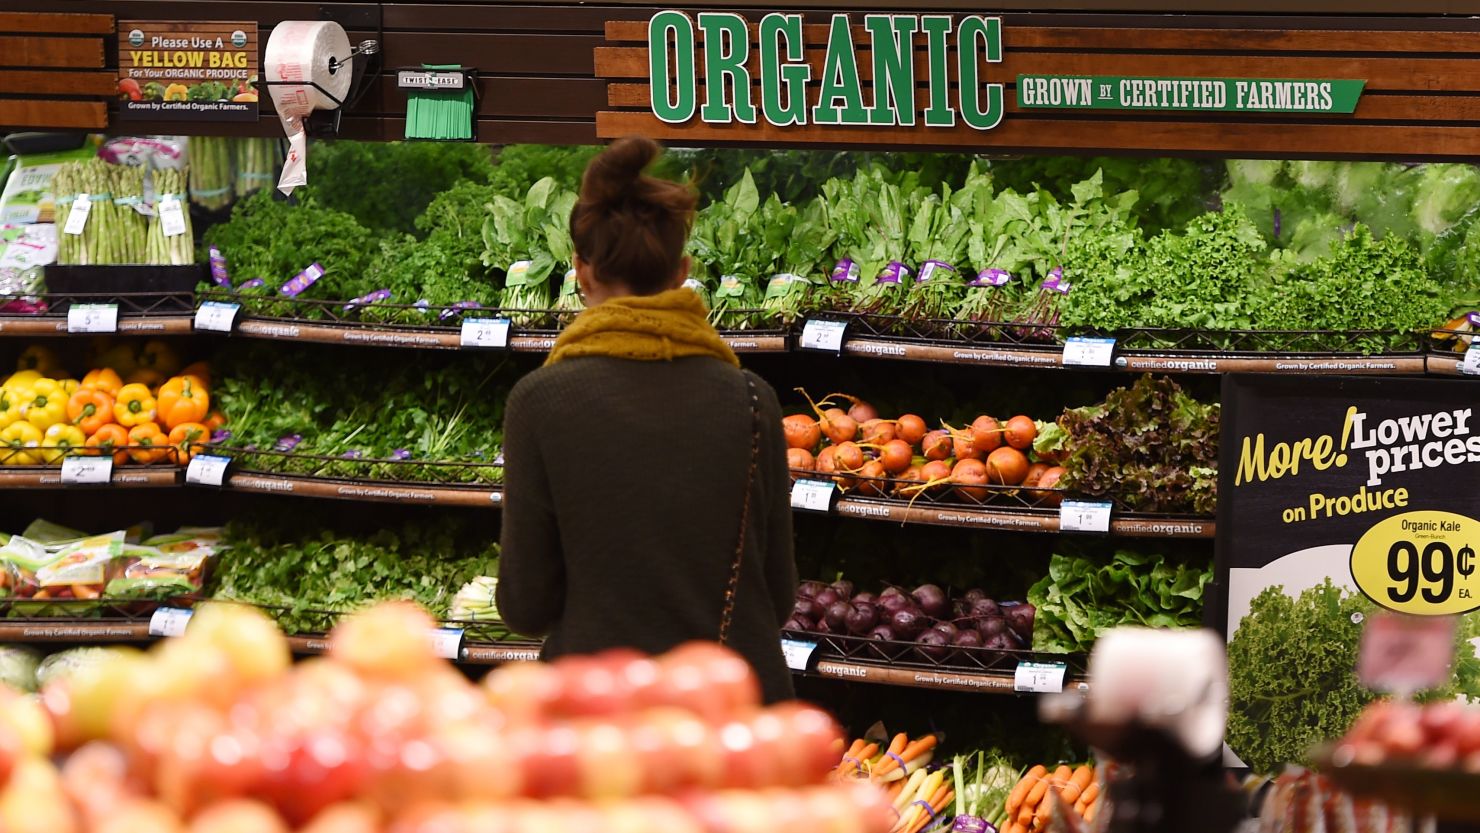 Organic produce for sale at a Ralph's Supermarket in California